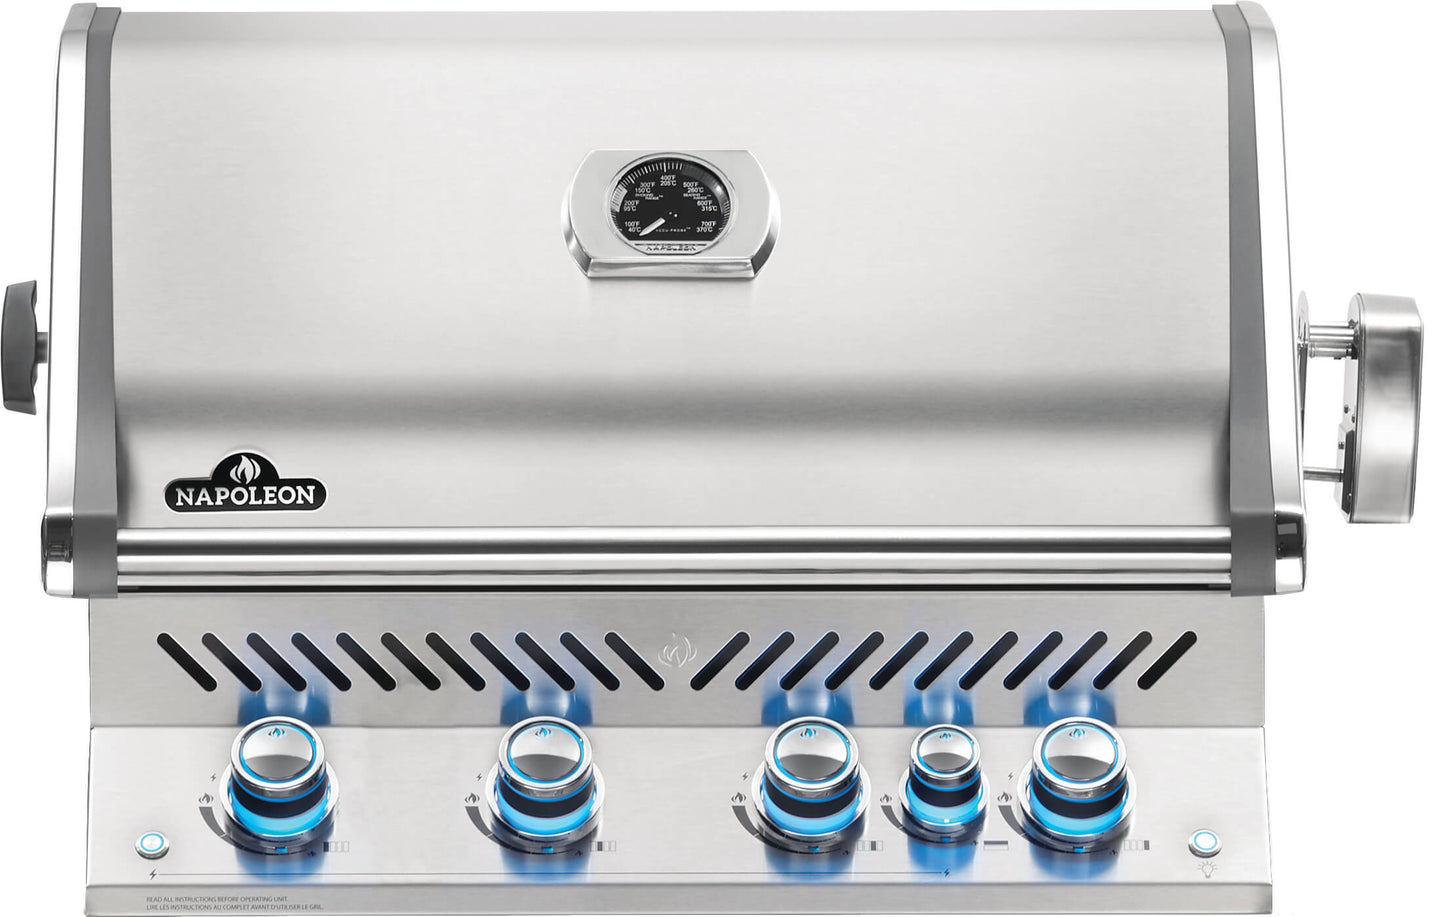 Built-in Prestige PRO™ 500 Grill Head with Infrared Rear Burner